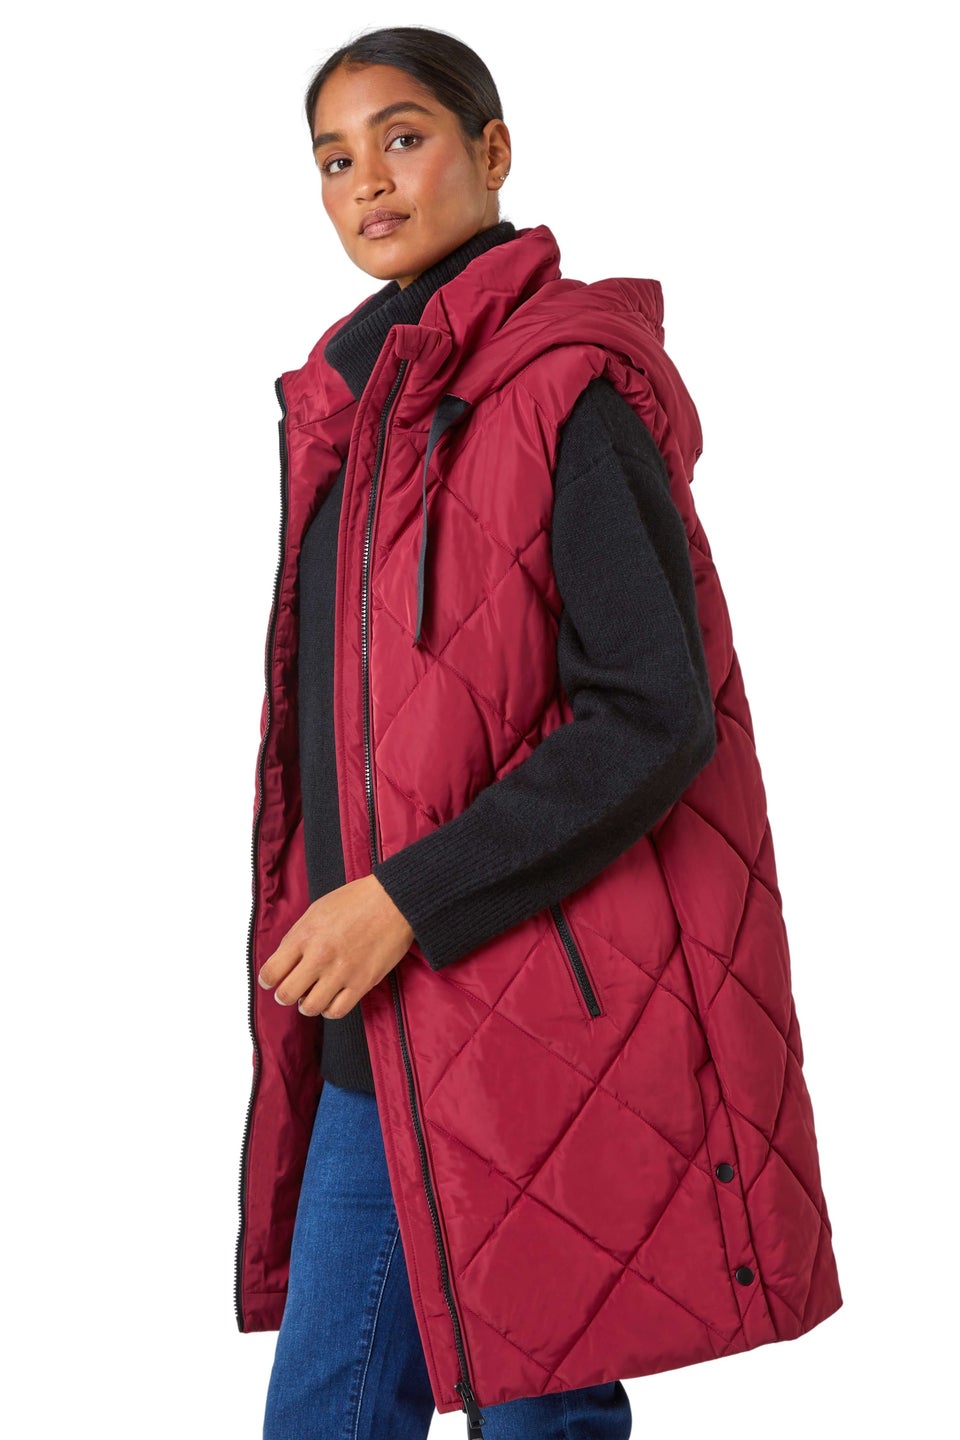 Roman Bordeaux Diamond Quilted Padded Gilet